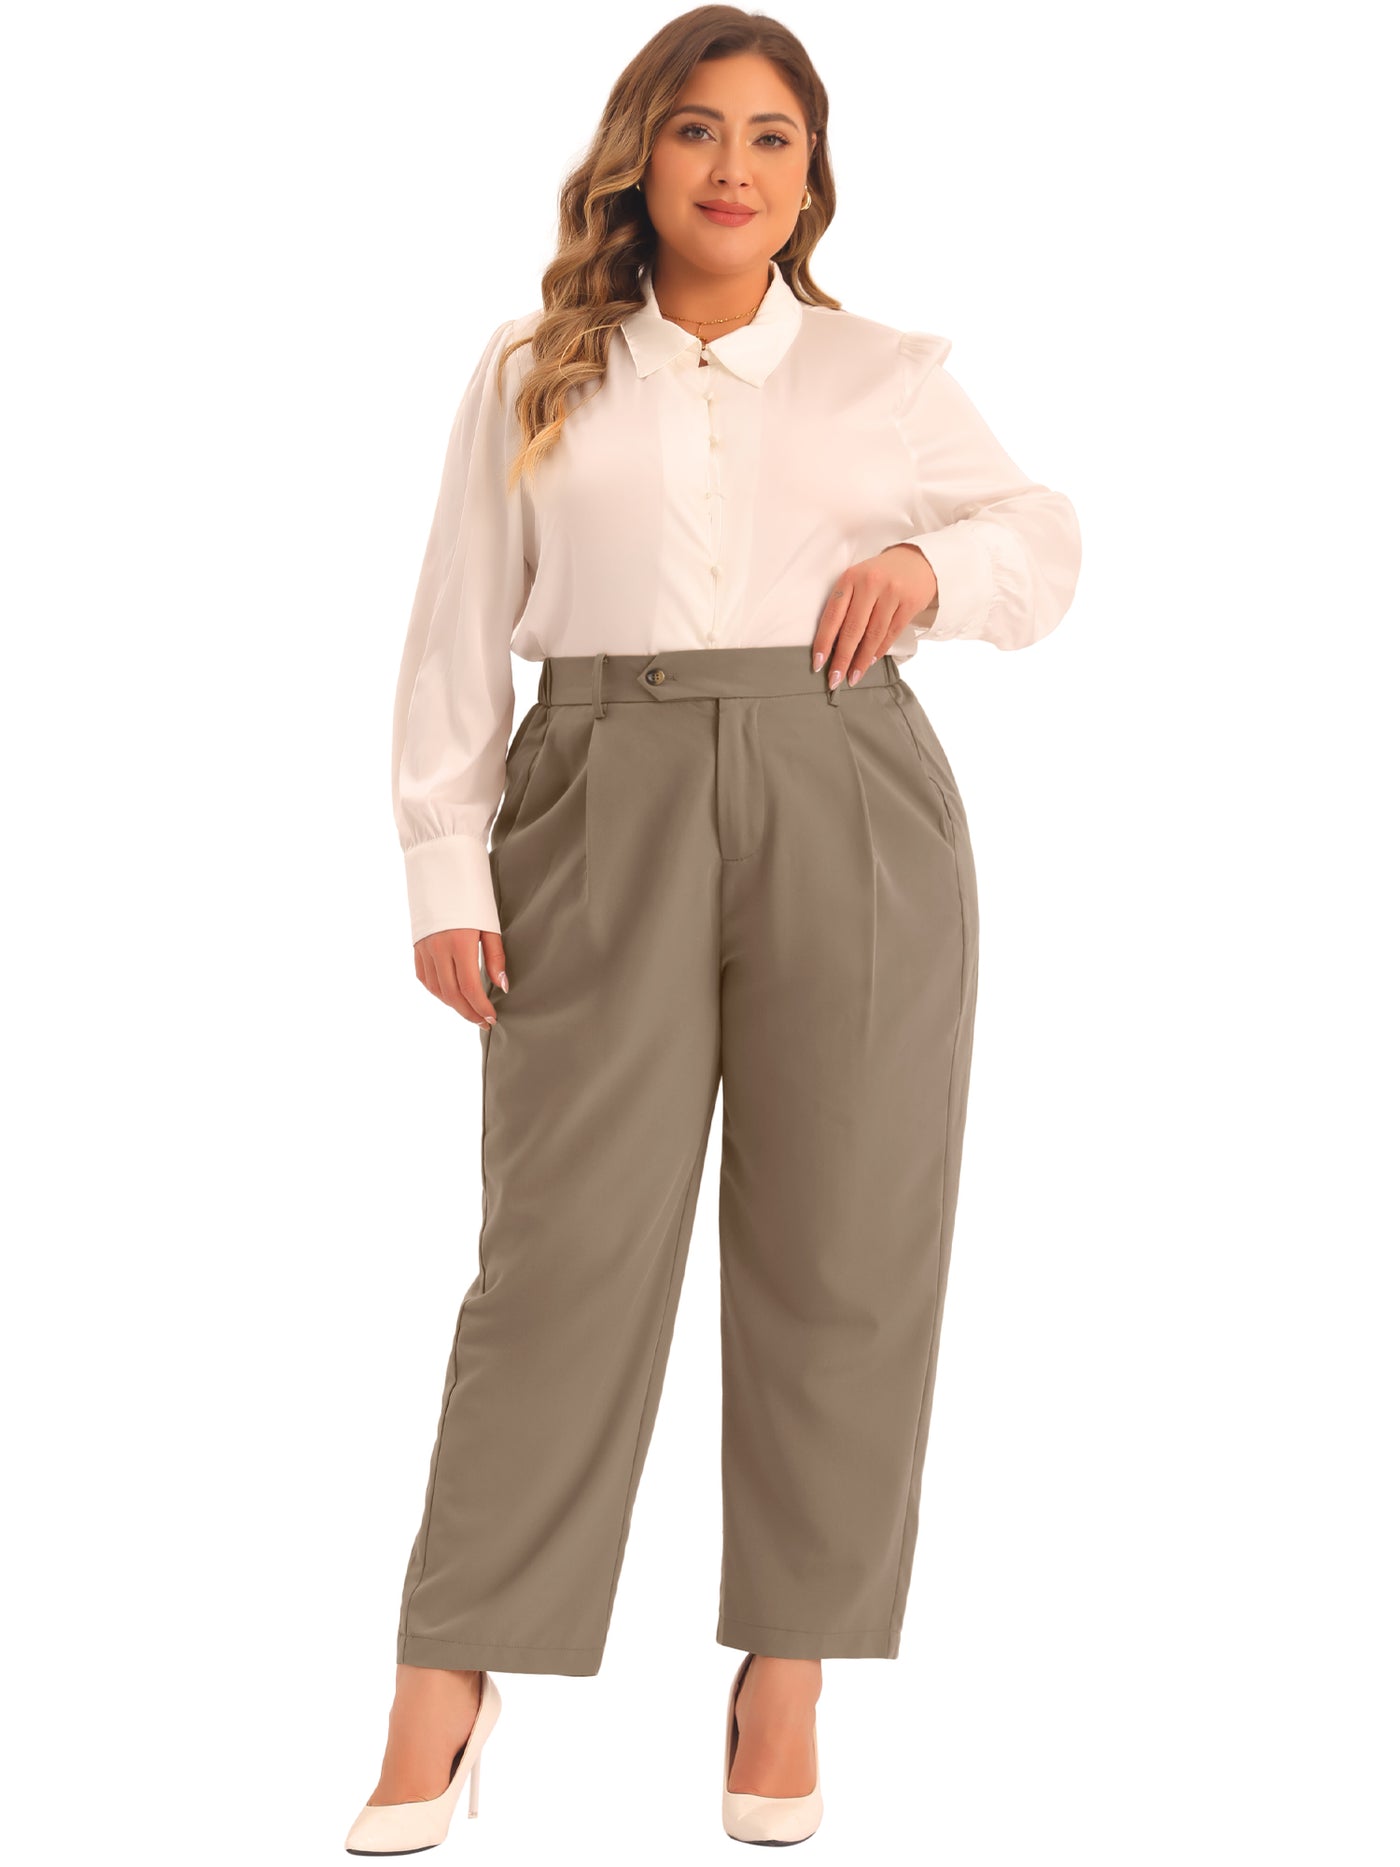 Bublédon Plus Size High Elastic Waisted Business Work Trousers Long Straight Suit Pants with Pocket